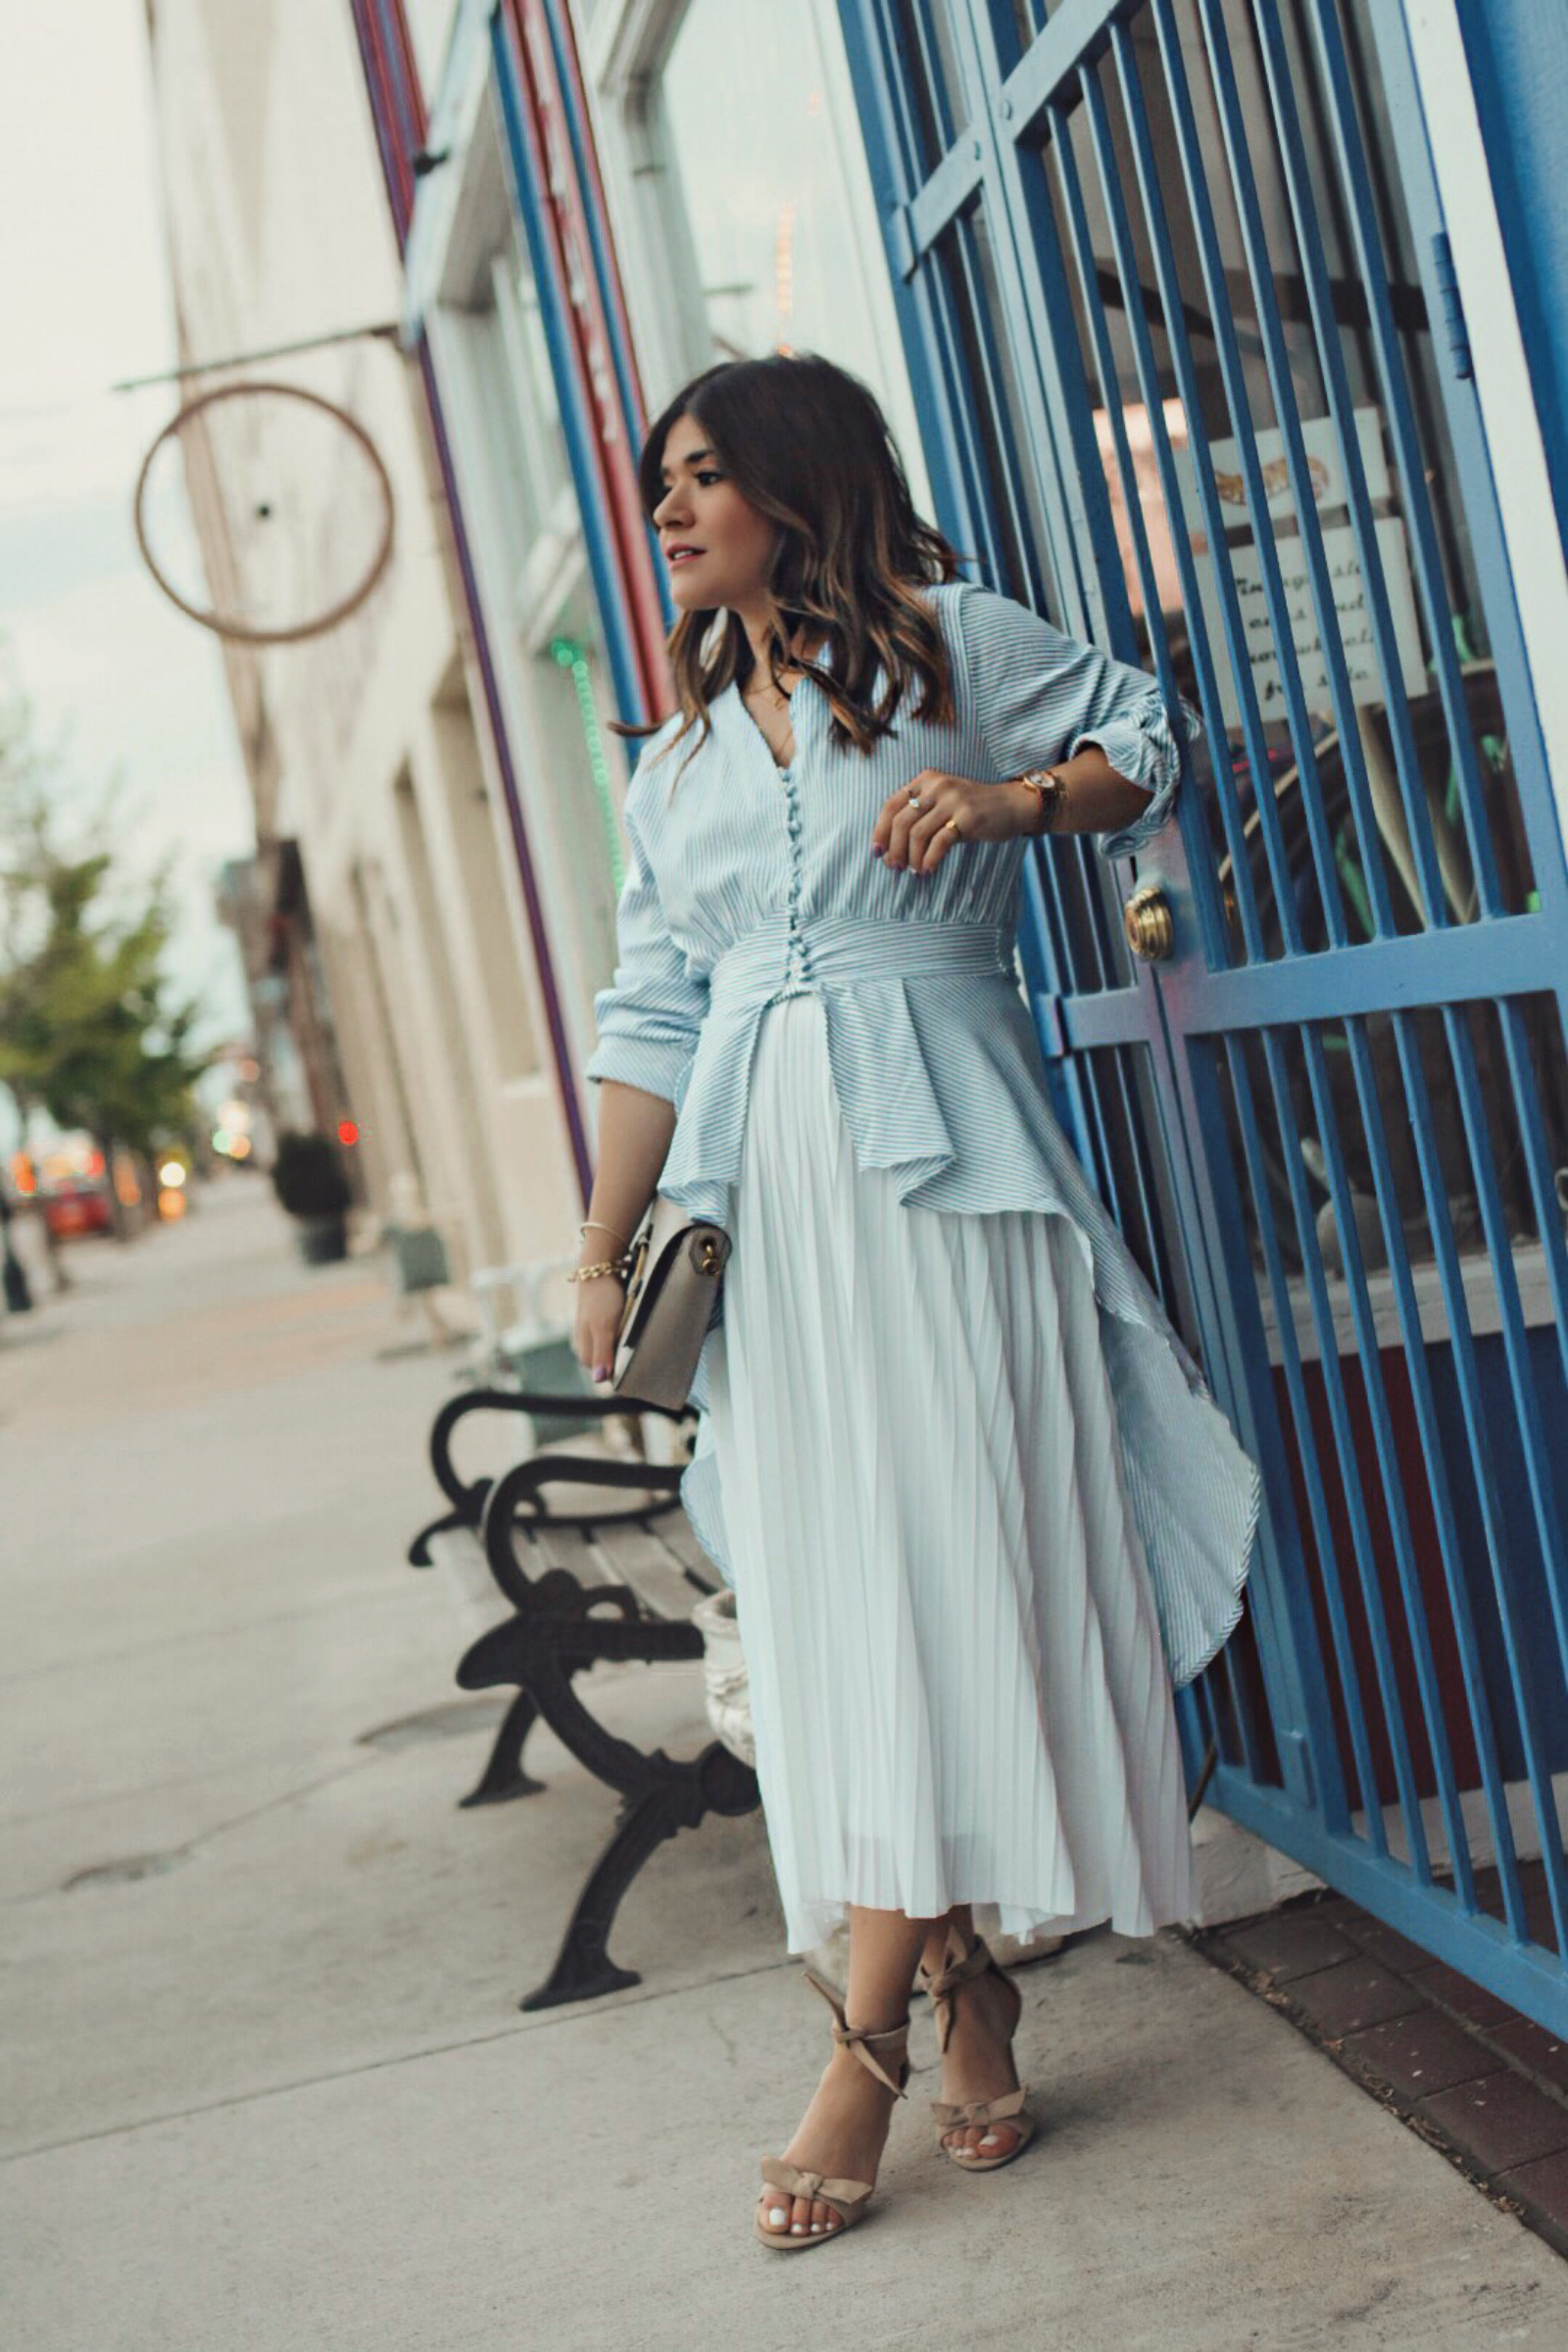 Carolina Hellal of Chic Talk wearing a Chicwish striped long top, a white midi skirt, and Vince Camuto sandals.